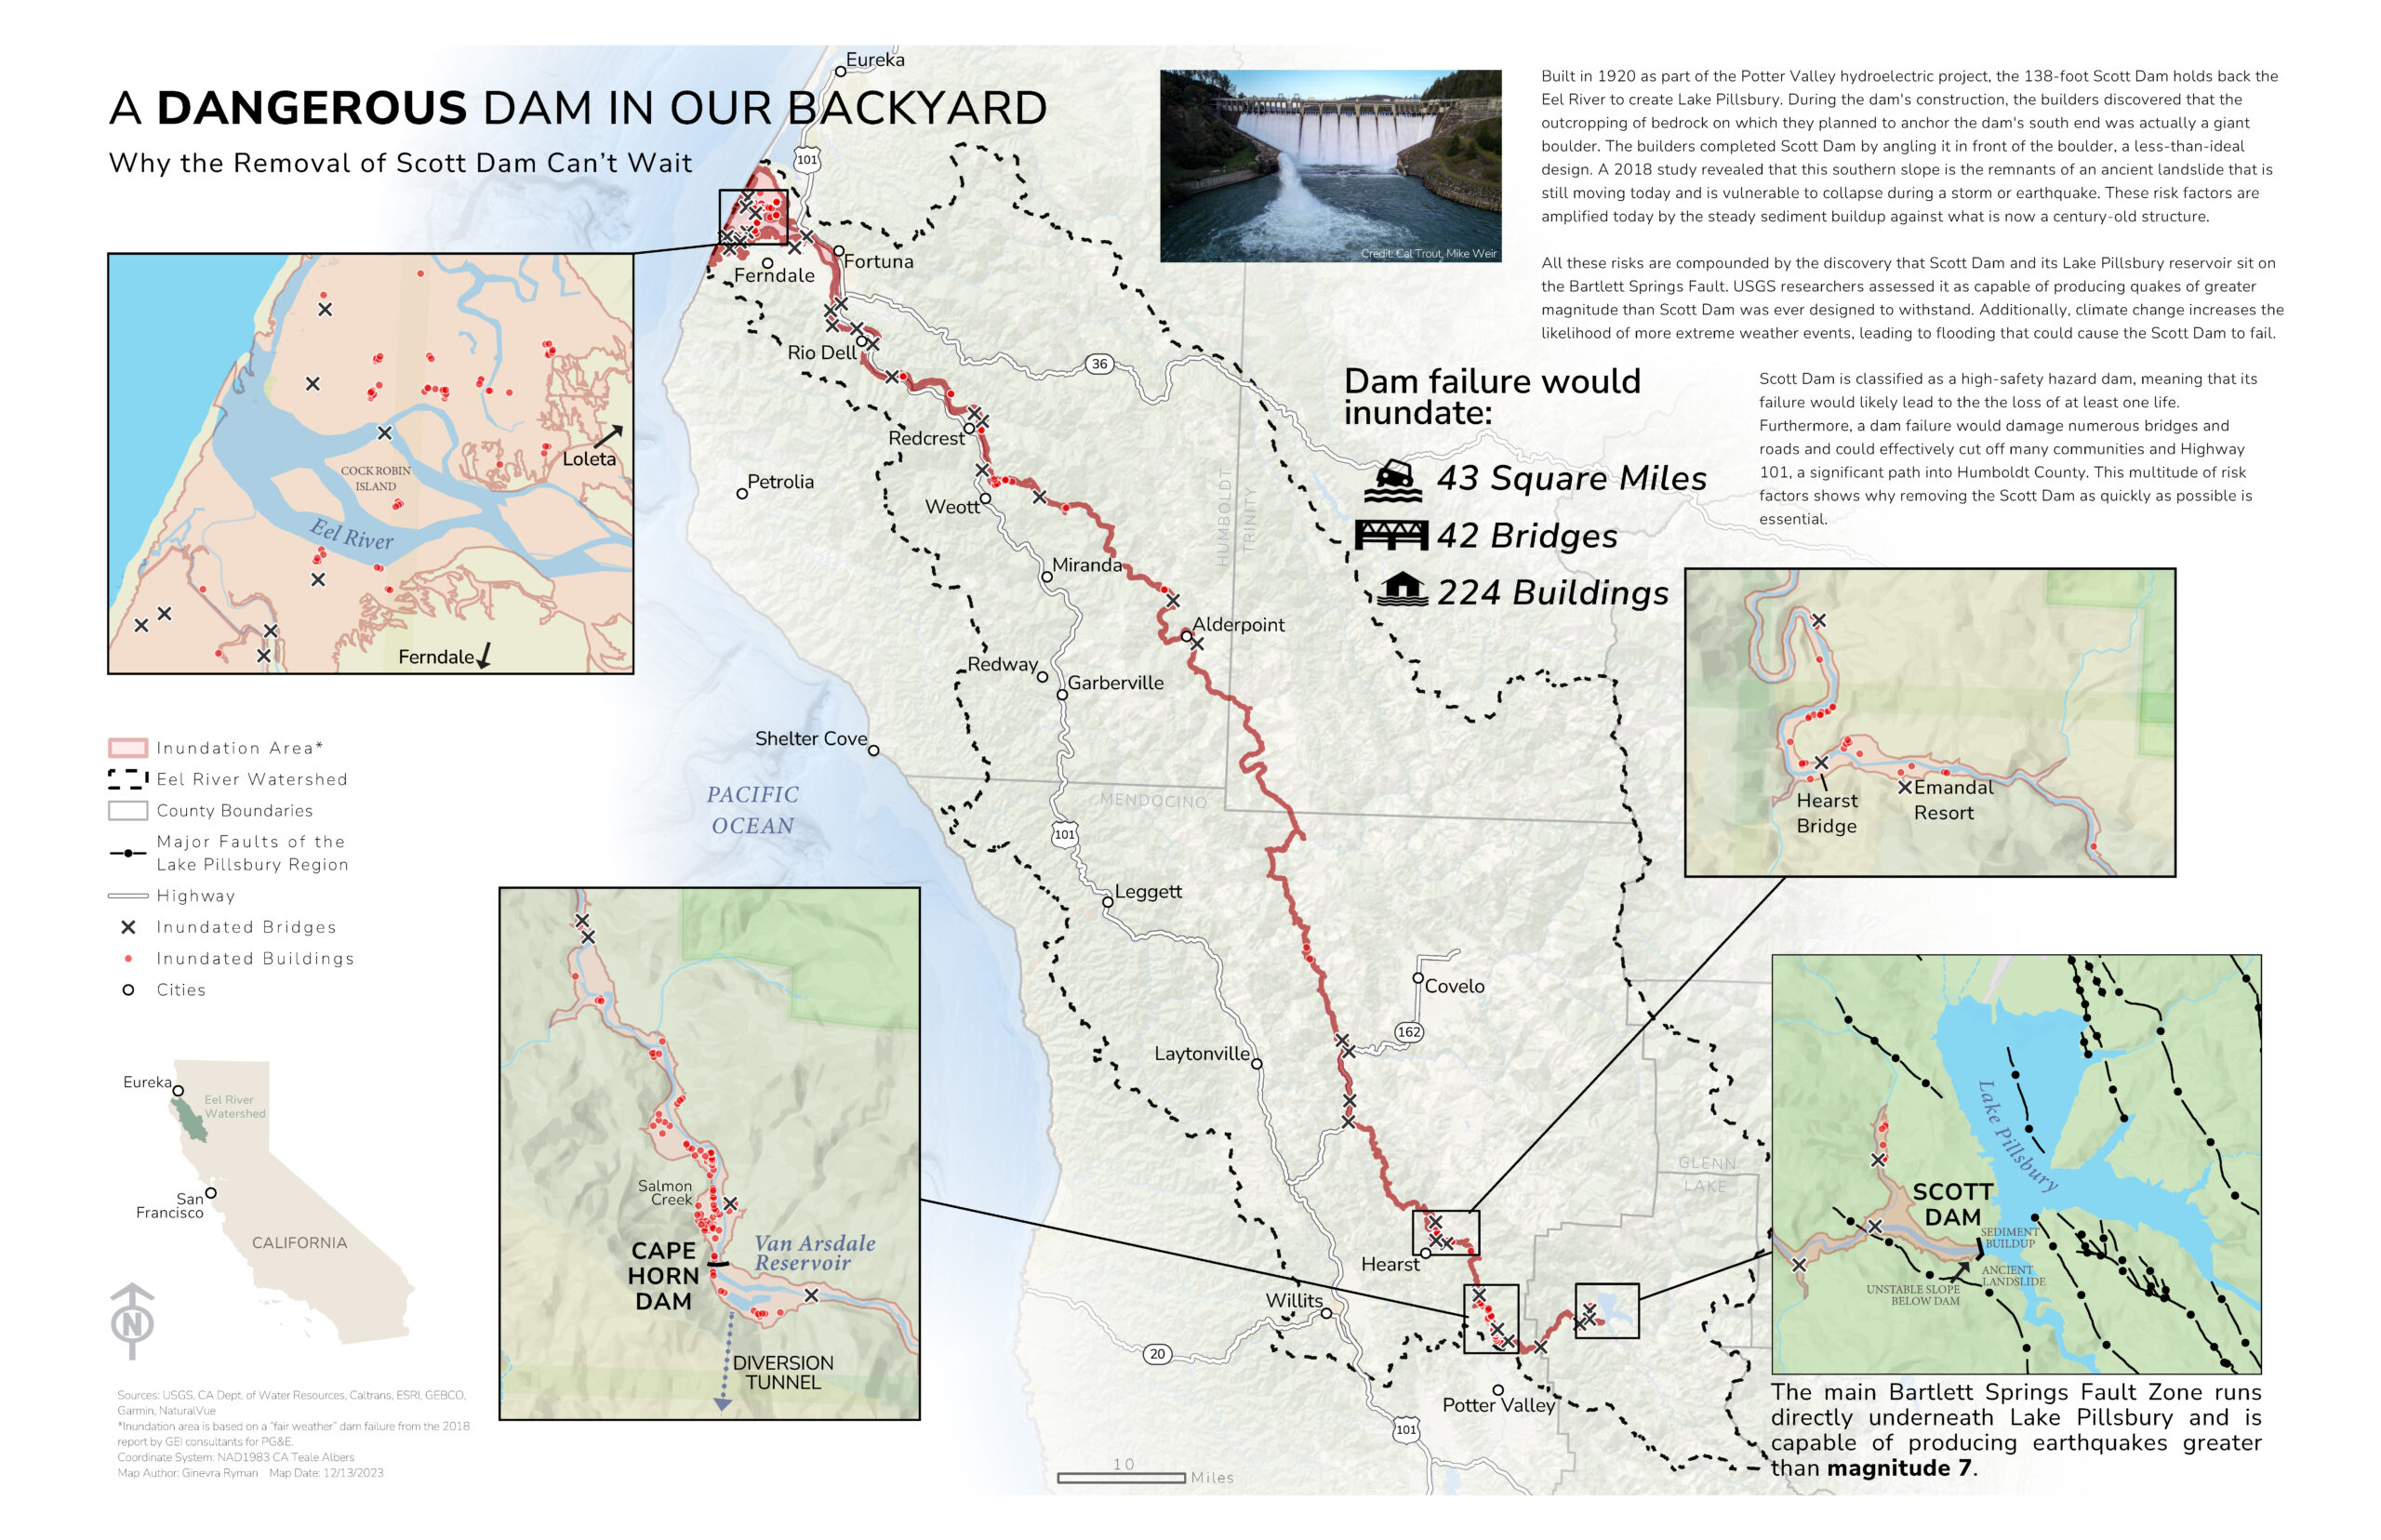 The failure of Scott Dam would inundate 43 square miles, 42 bridges, and 224 buildings.